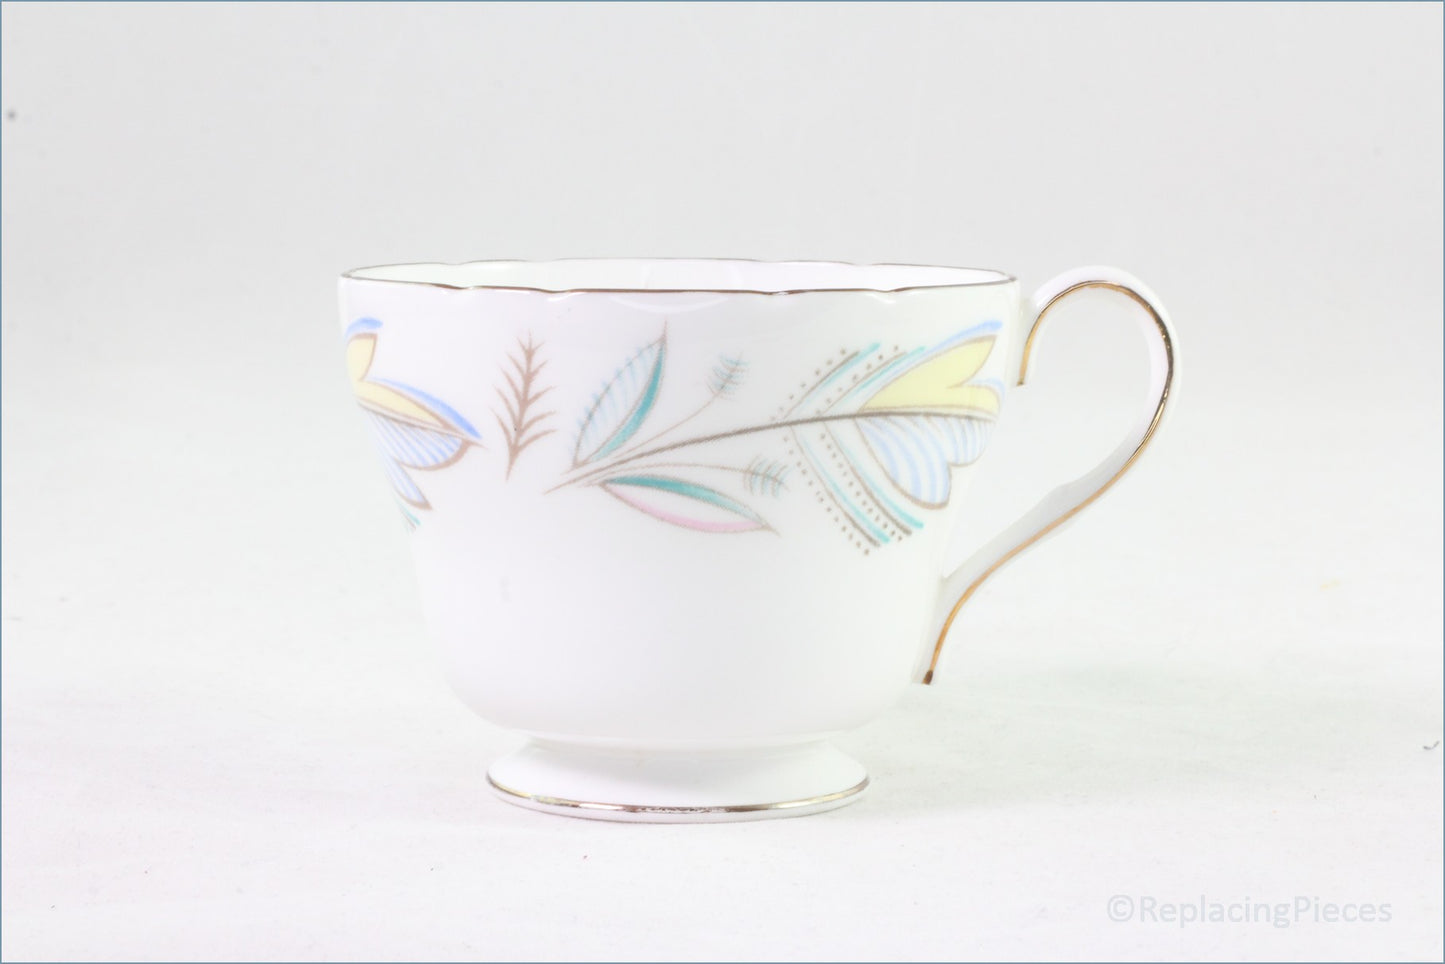 Shelley - Caprice (Gold) - 2 1/2" Tall Teacup